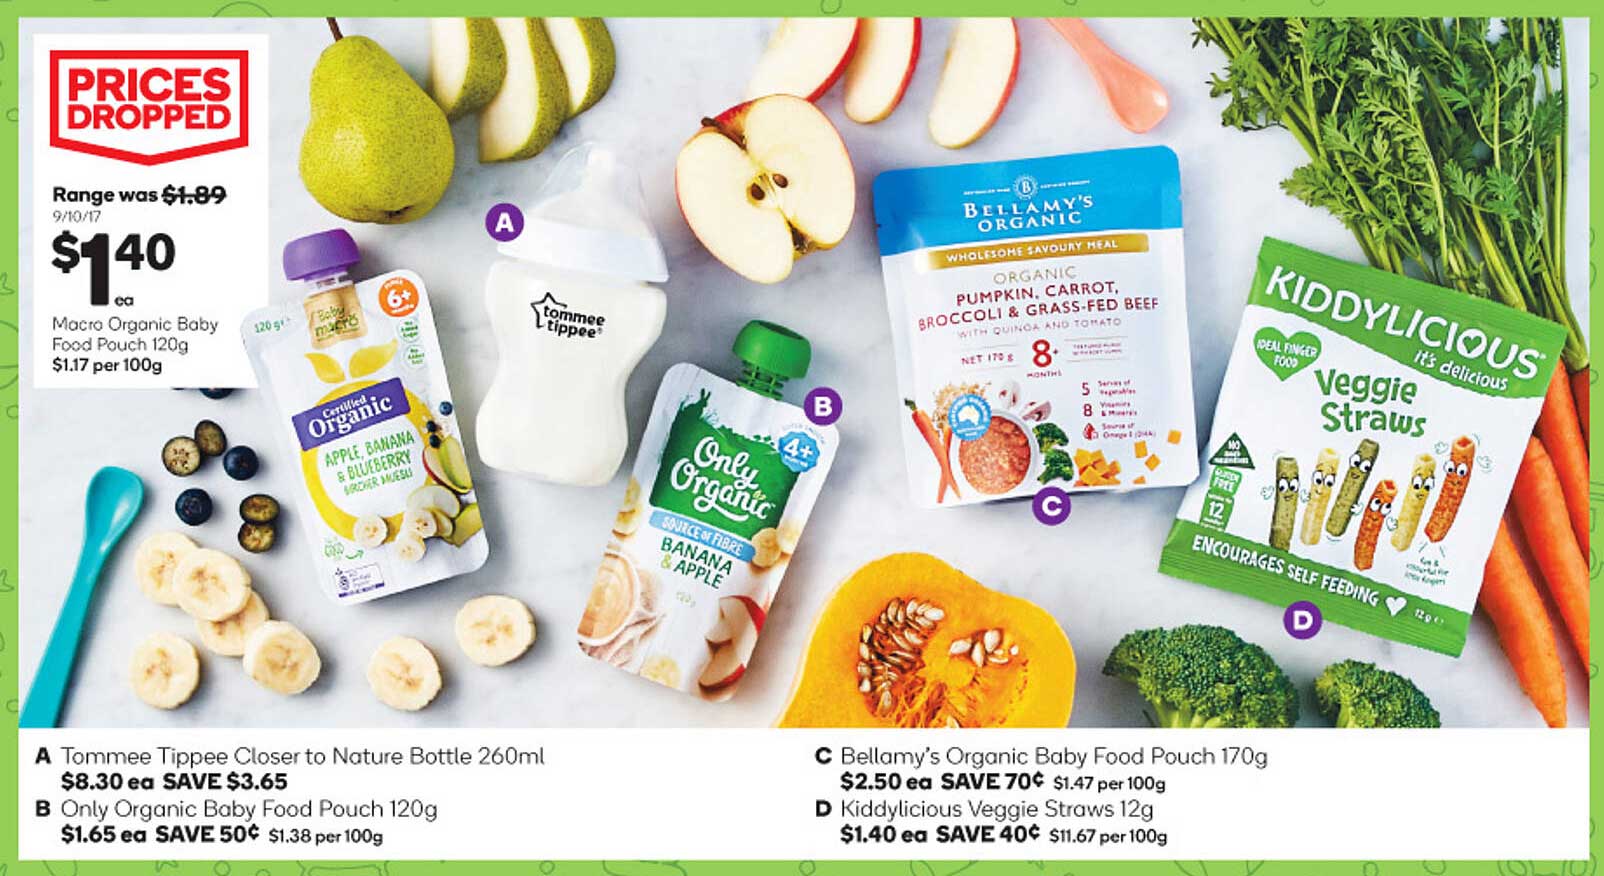 Woolworths Macro Organic Baby Food Pouch